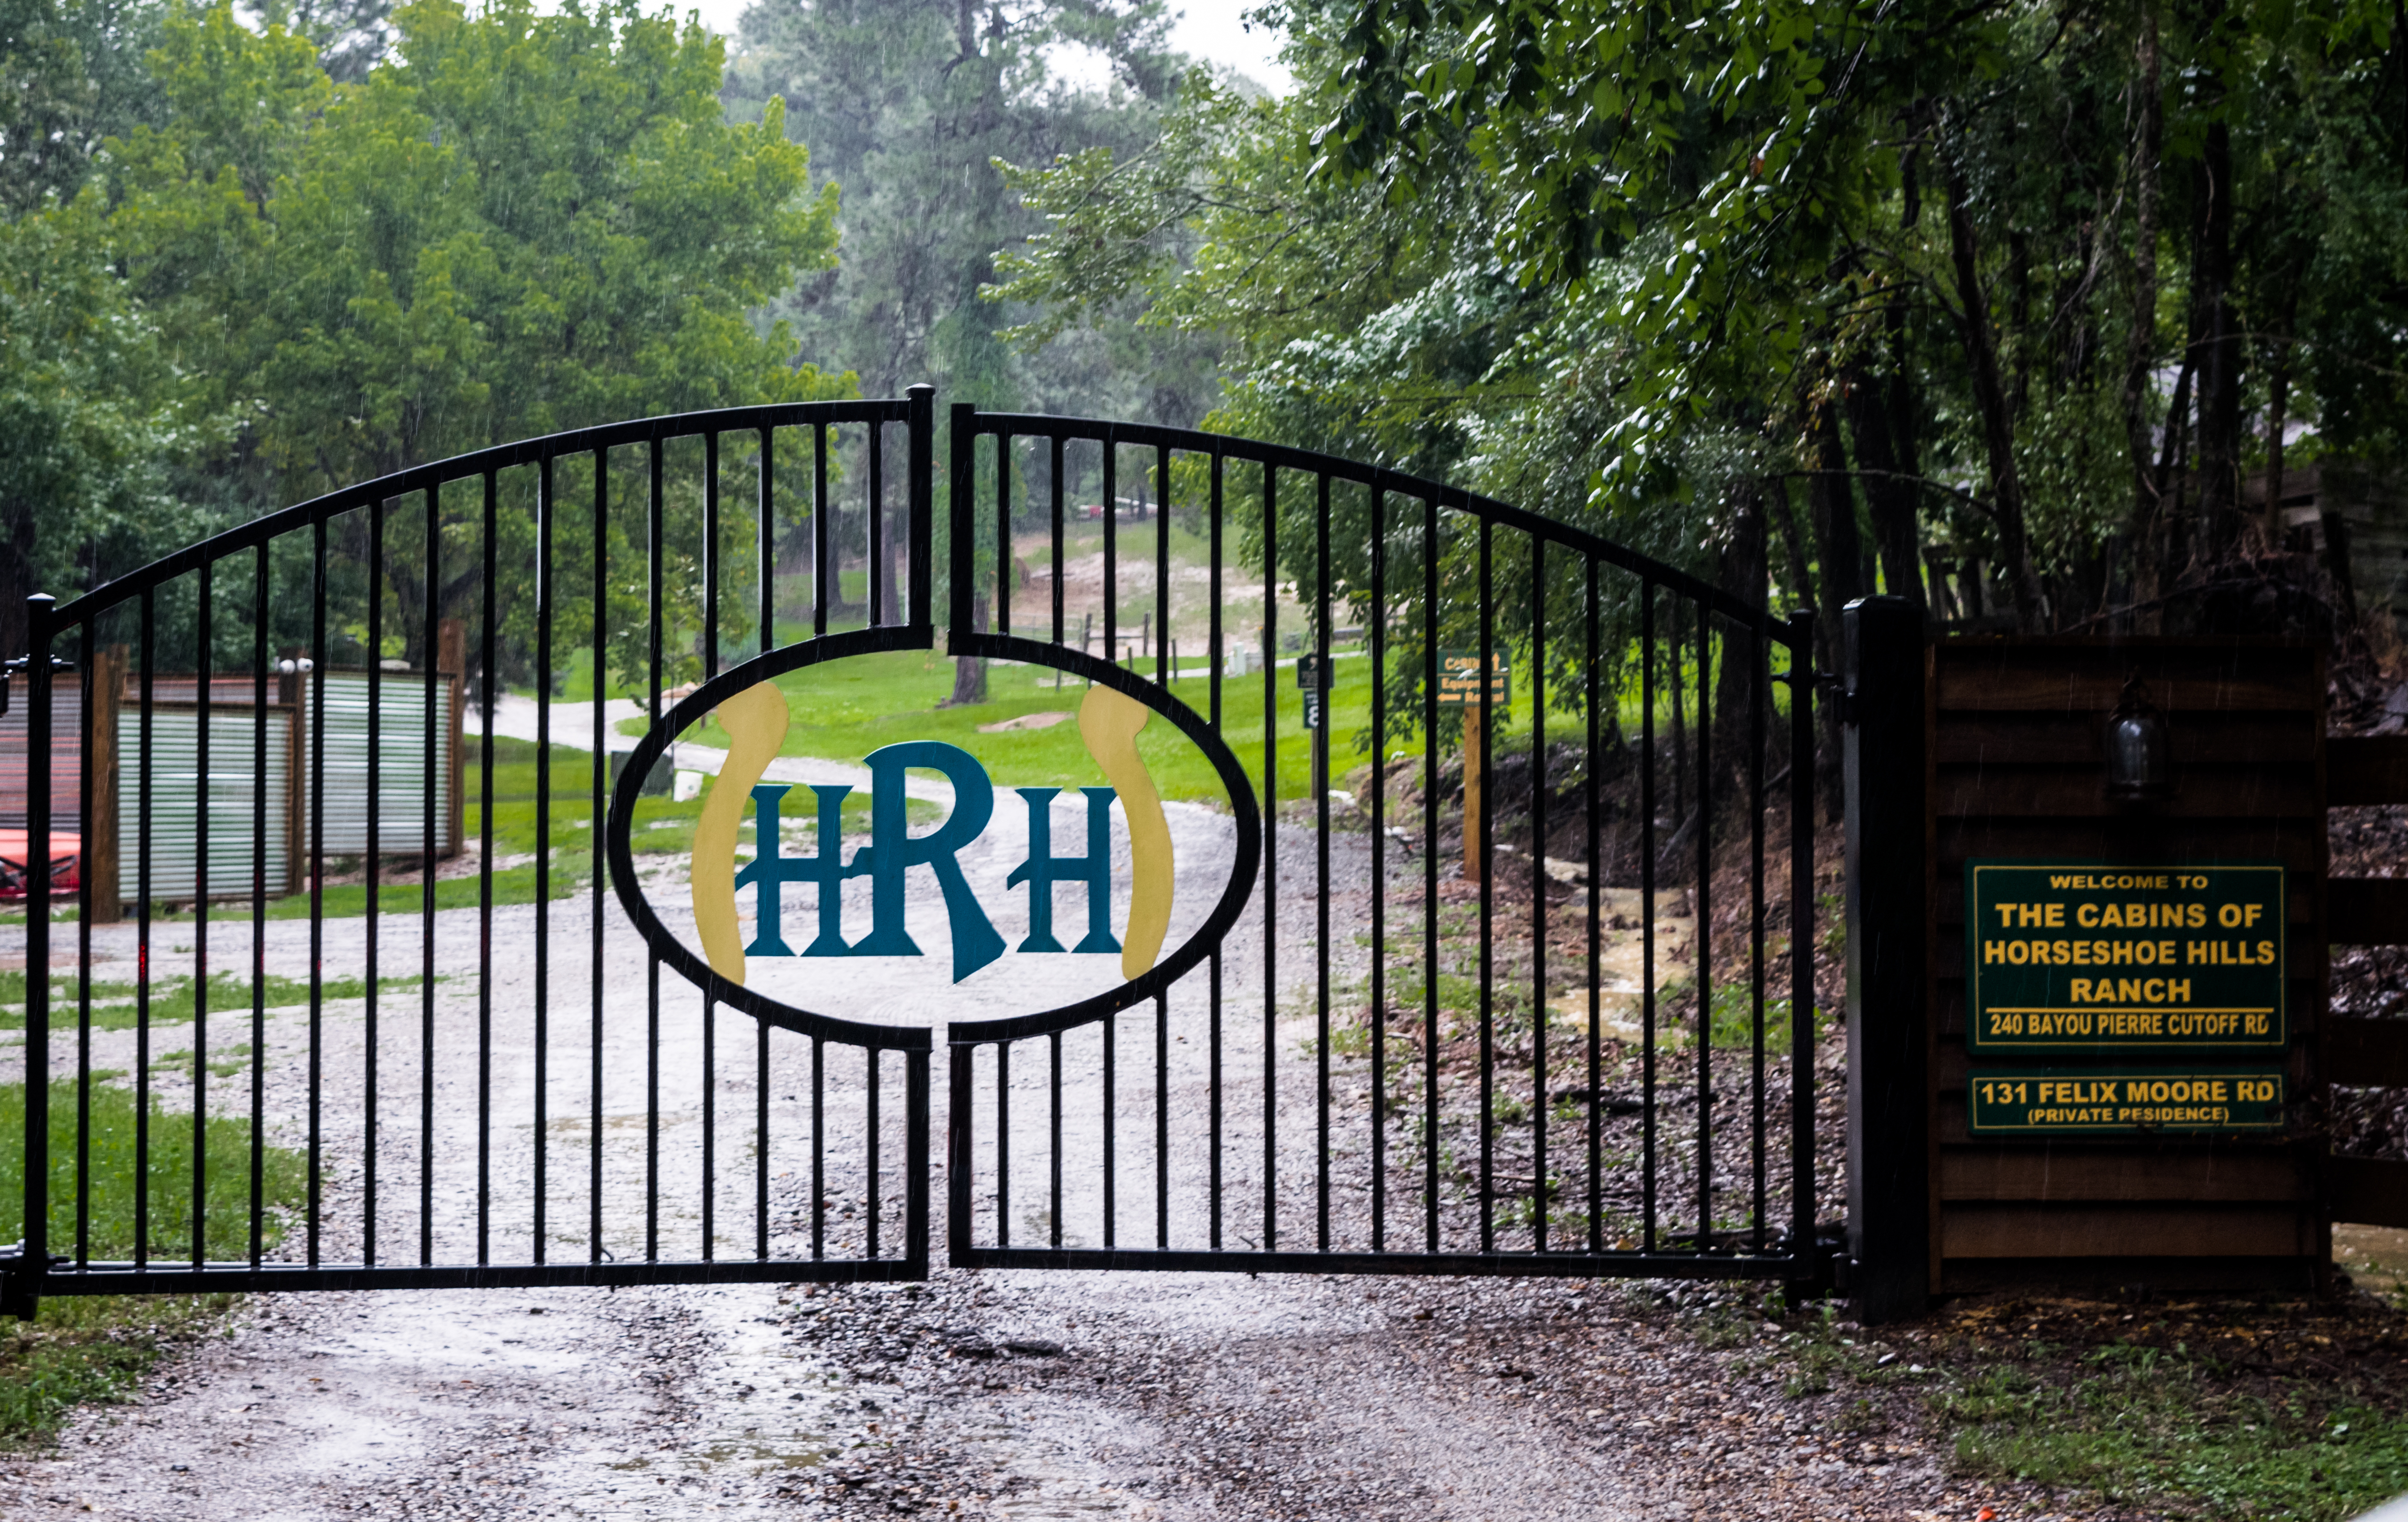 Secure gated entry to Horseshoe Hills Ranch